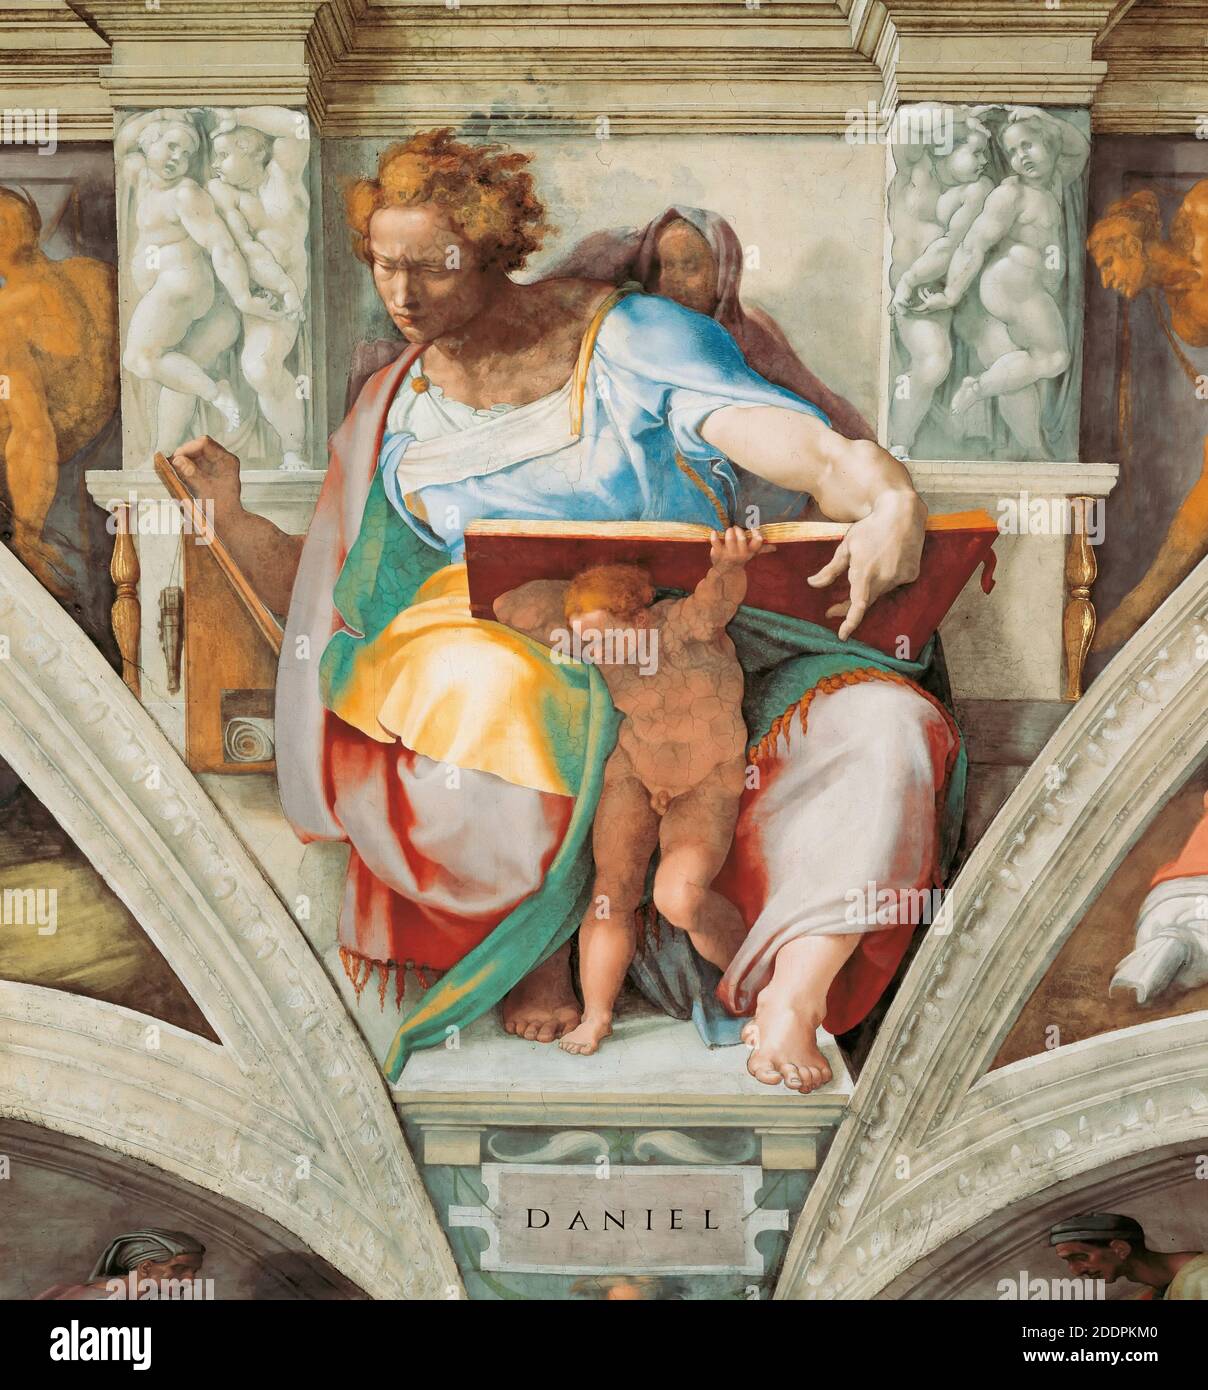 Prophets and Sibyls: Daniel (Sistine Chapel ceiling in the Vatican). Photo after restoration. Museum: The Sistine Chapel, Vatican. Author: MICHELANGELO BUONARROTI. Stock Photo